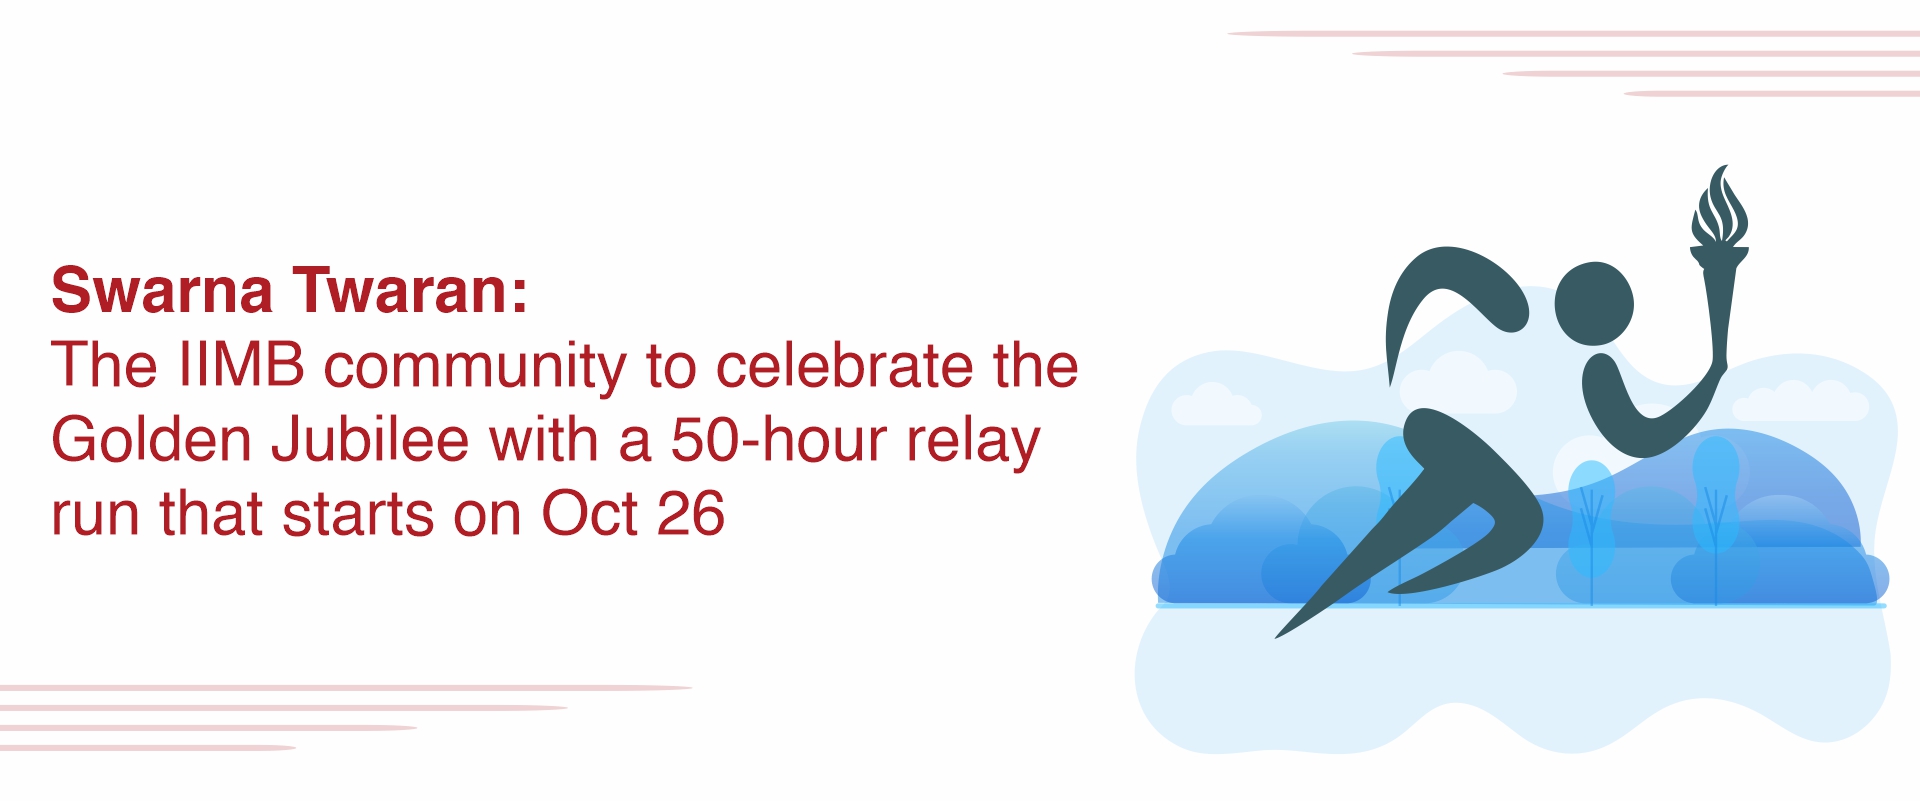 Swarna Twaran: The IIMB community to celebrate the Golden Jubilee with a 50-hour relay marathon that starts on Oct 26